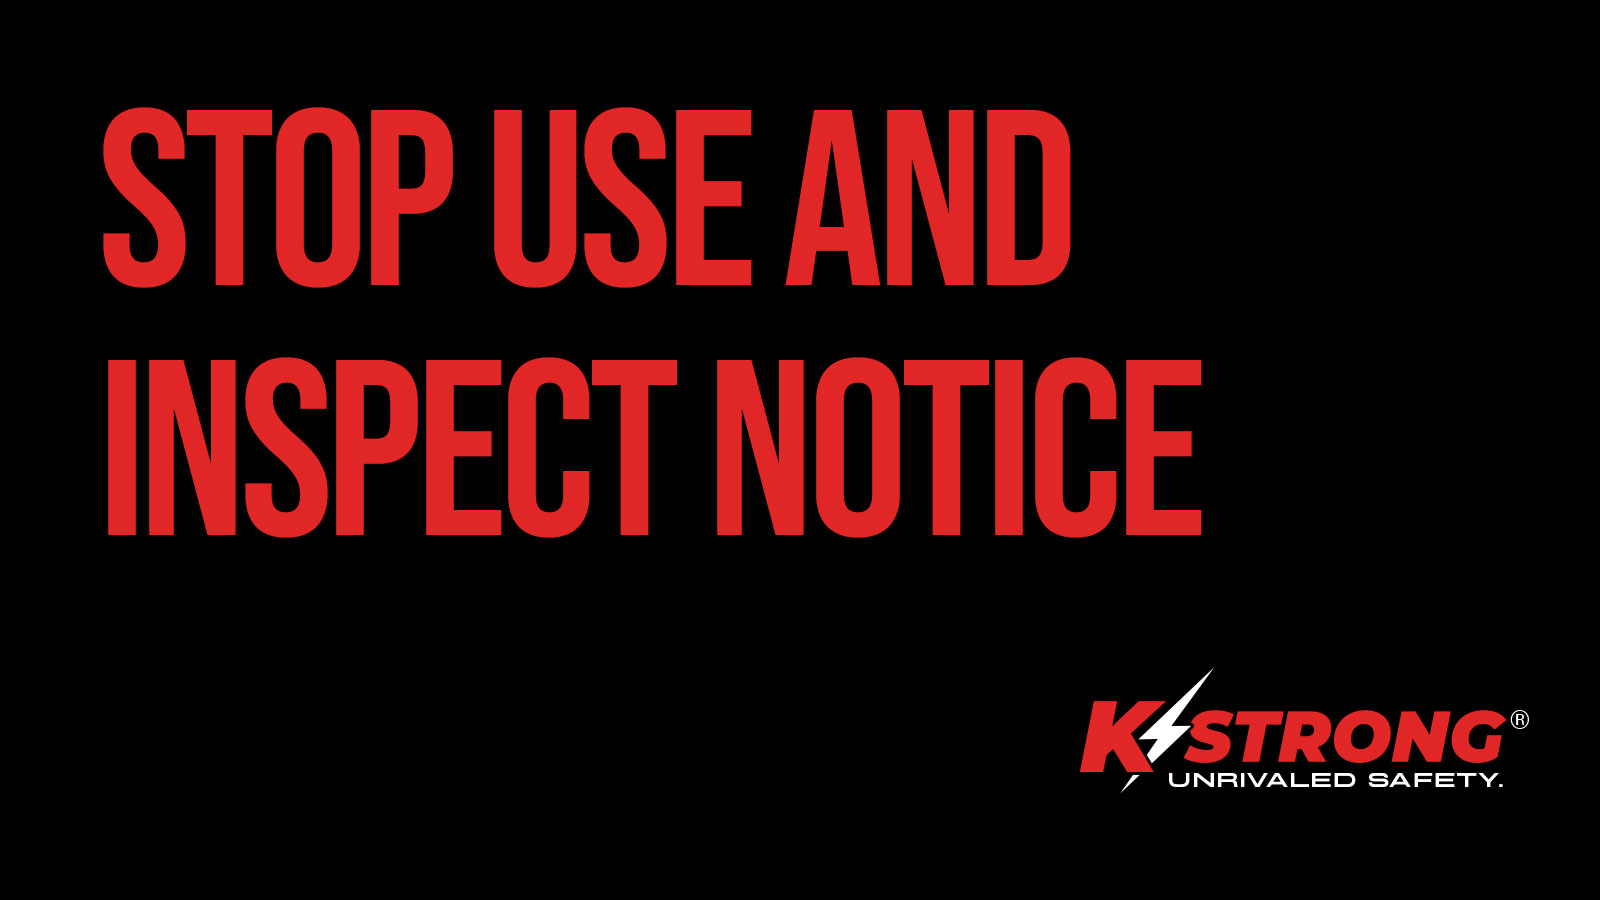 Immediate Stop Use and Inspect Notice // Notice #: KS11-22